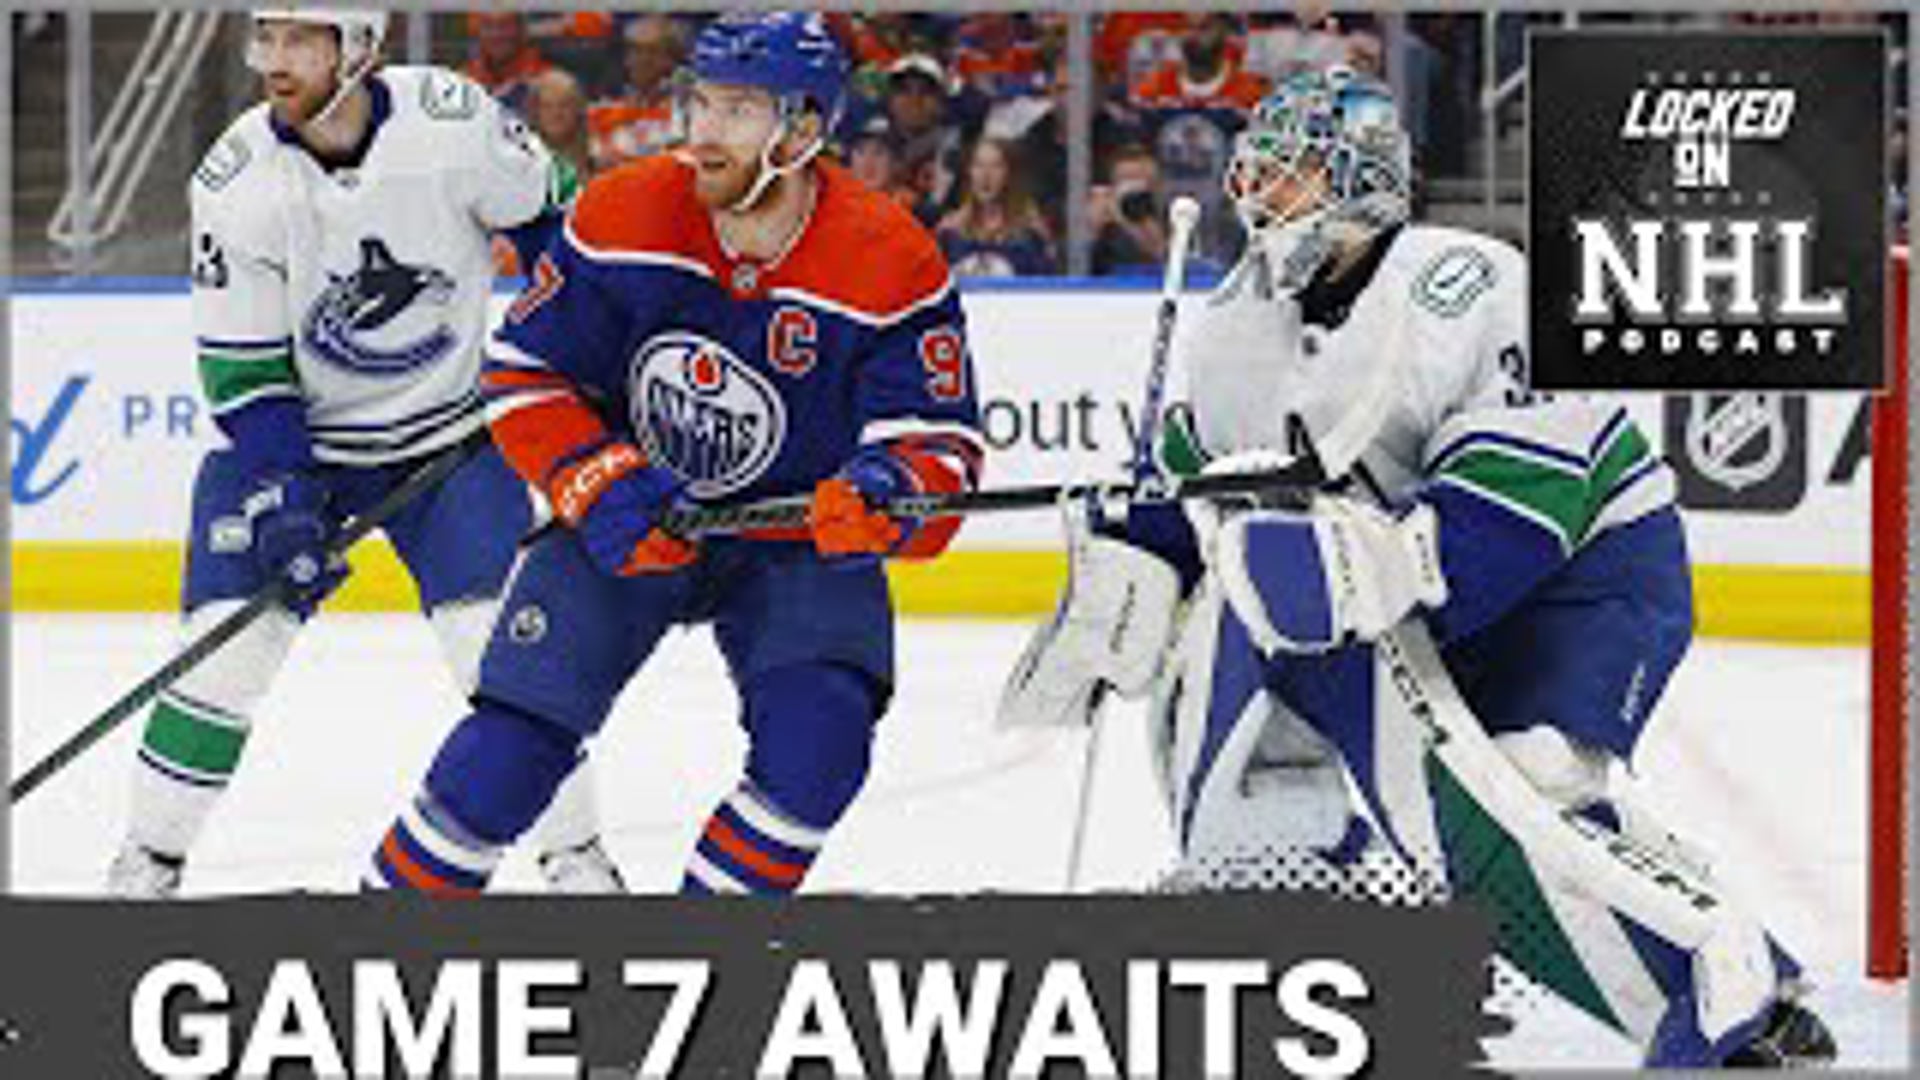 The Edmonton Oilers came through to win Game 6 and force a 7th and deciding game in their Stanley Cup Playoff series with the Vancouver Canucks.